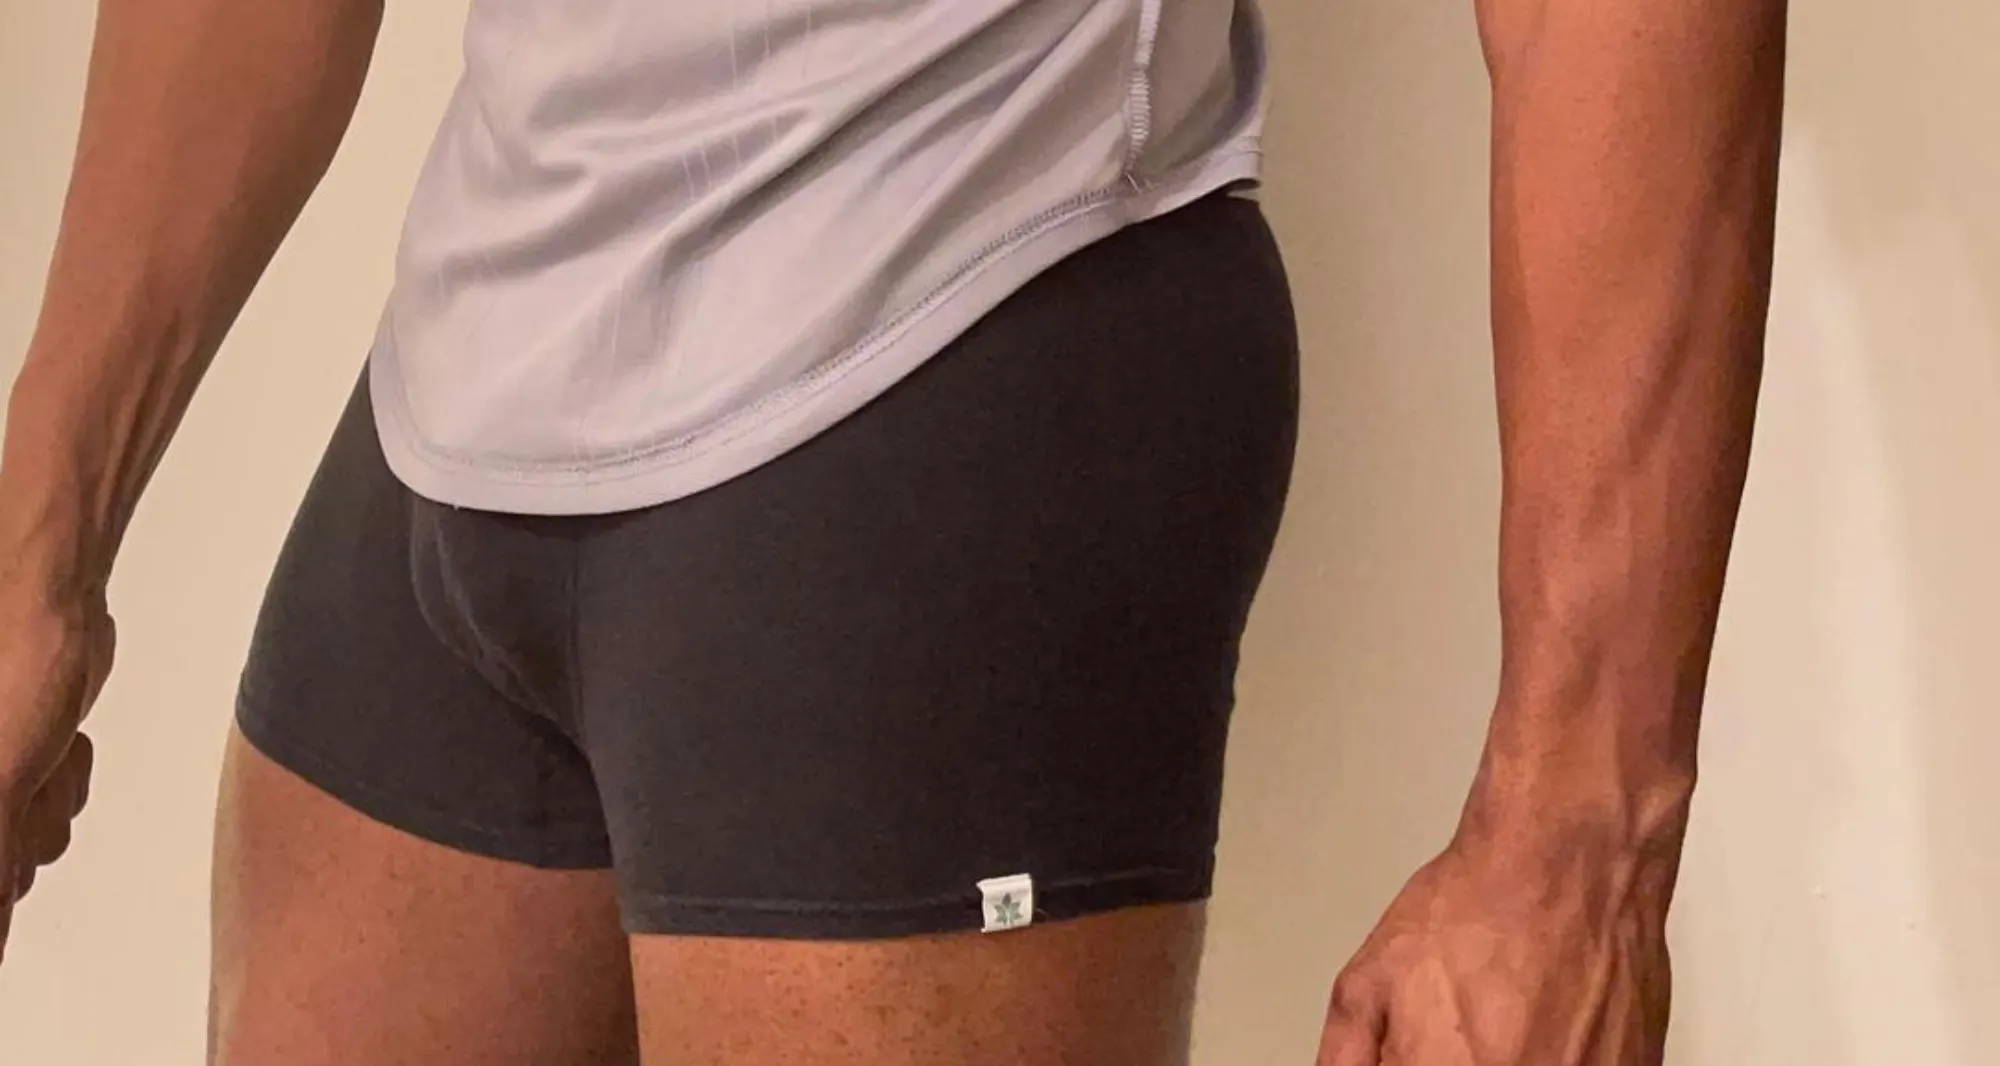 man wearing a light gray shirt with black trunks underwear flexing his arms